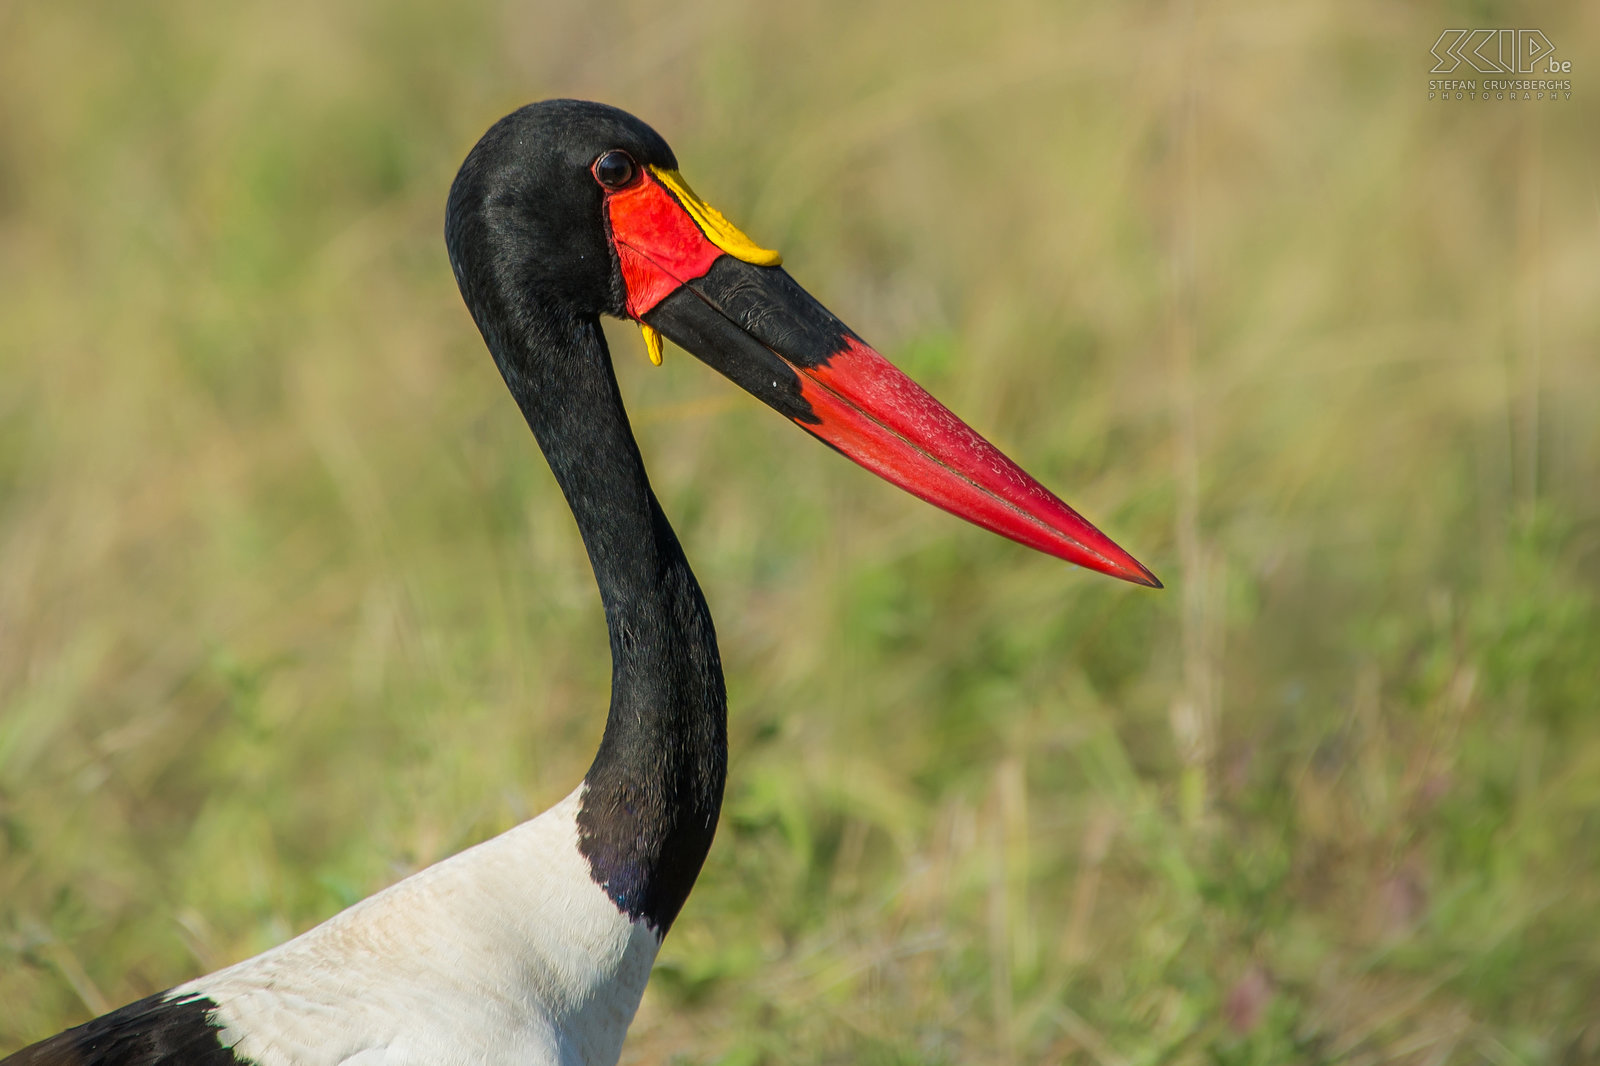 South Luangwa - Close-up saddle-billed stork Close-up of saddle-billed stork (Ephippiorhynchus senegalensis), a large stork with a massive bill that is red with a black band and a yellow frontal shield (the 'saddle').  Stefan Cruysberghs